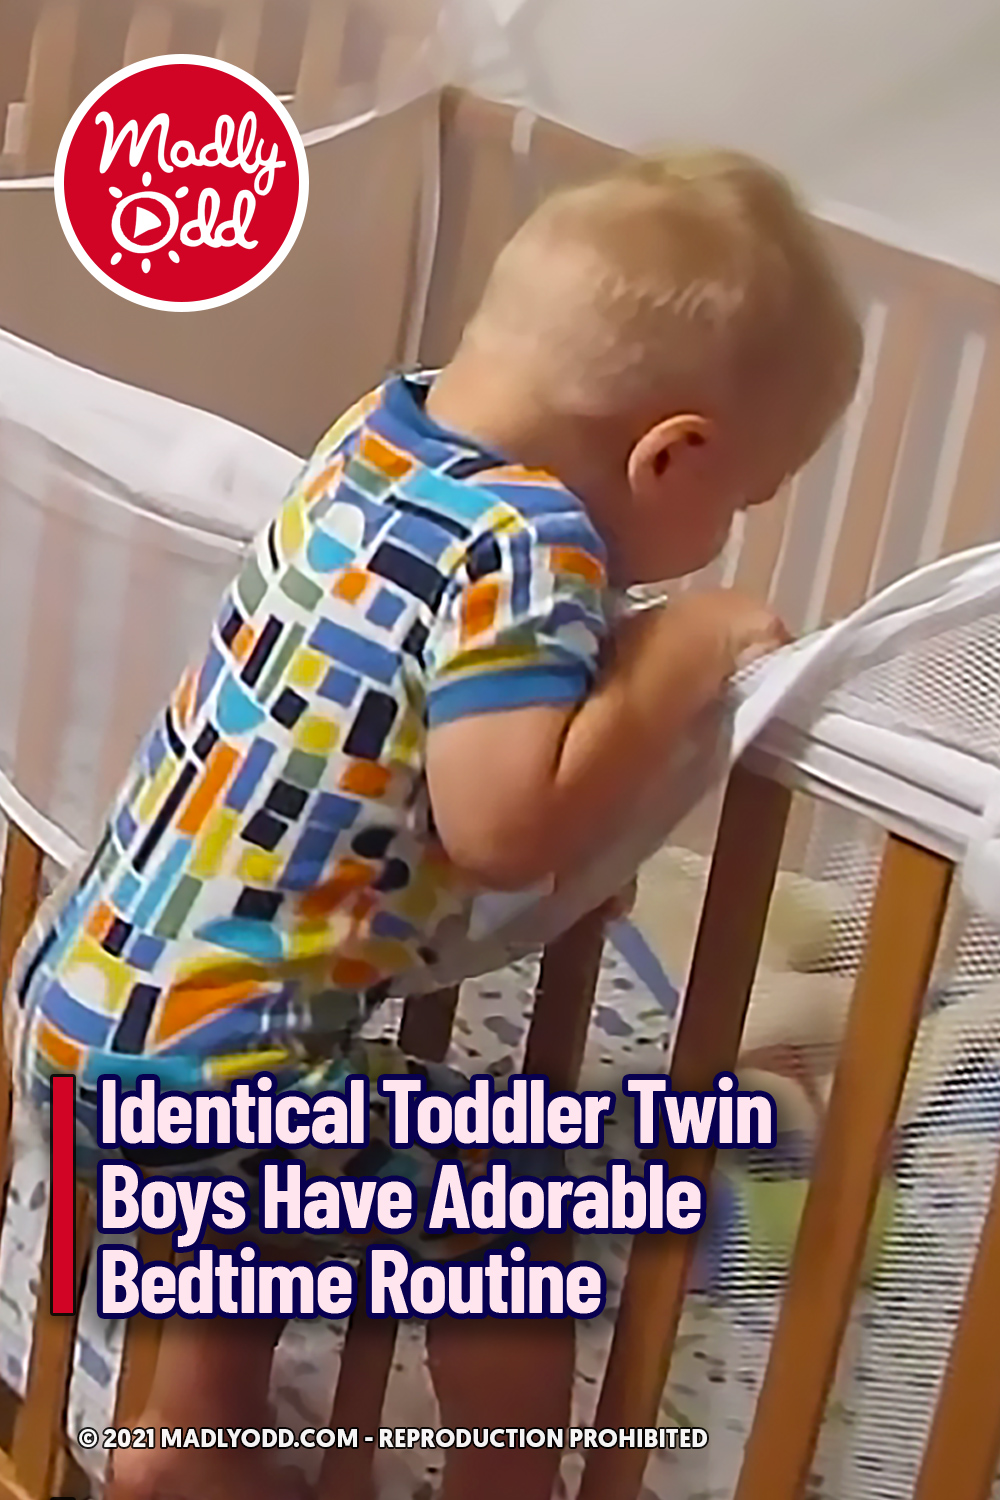 Identical Toddler Twin Boys Have Adorable Bedtime Routine